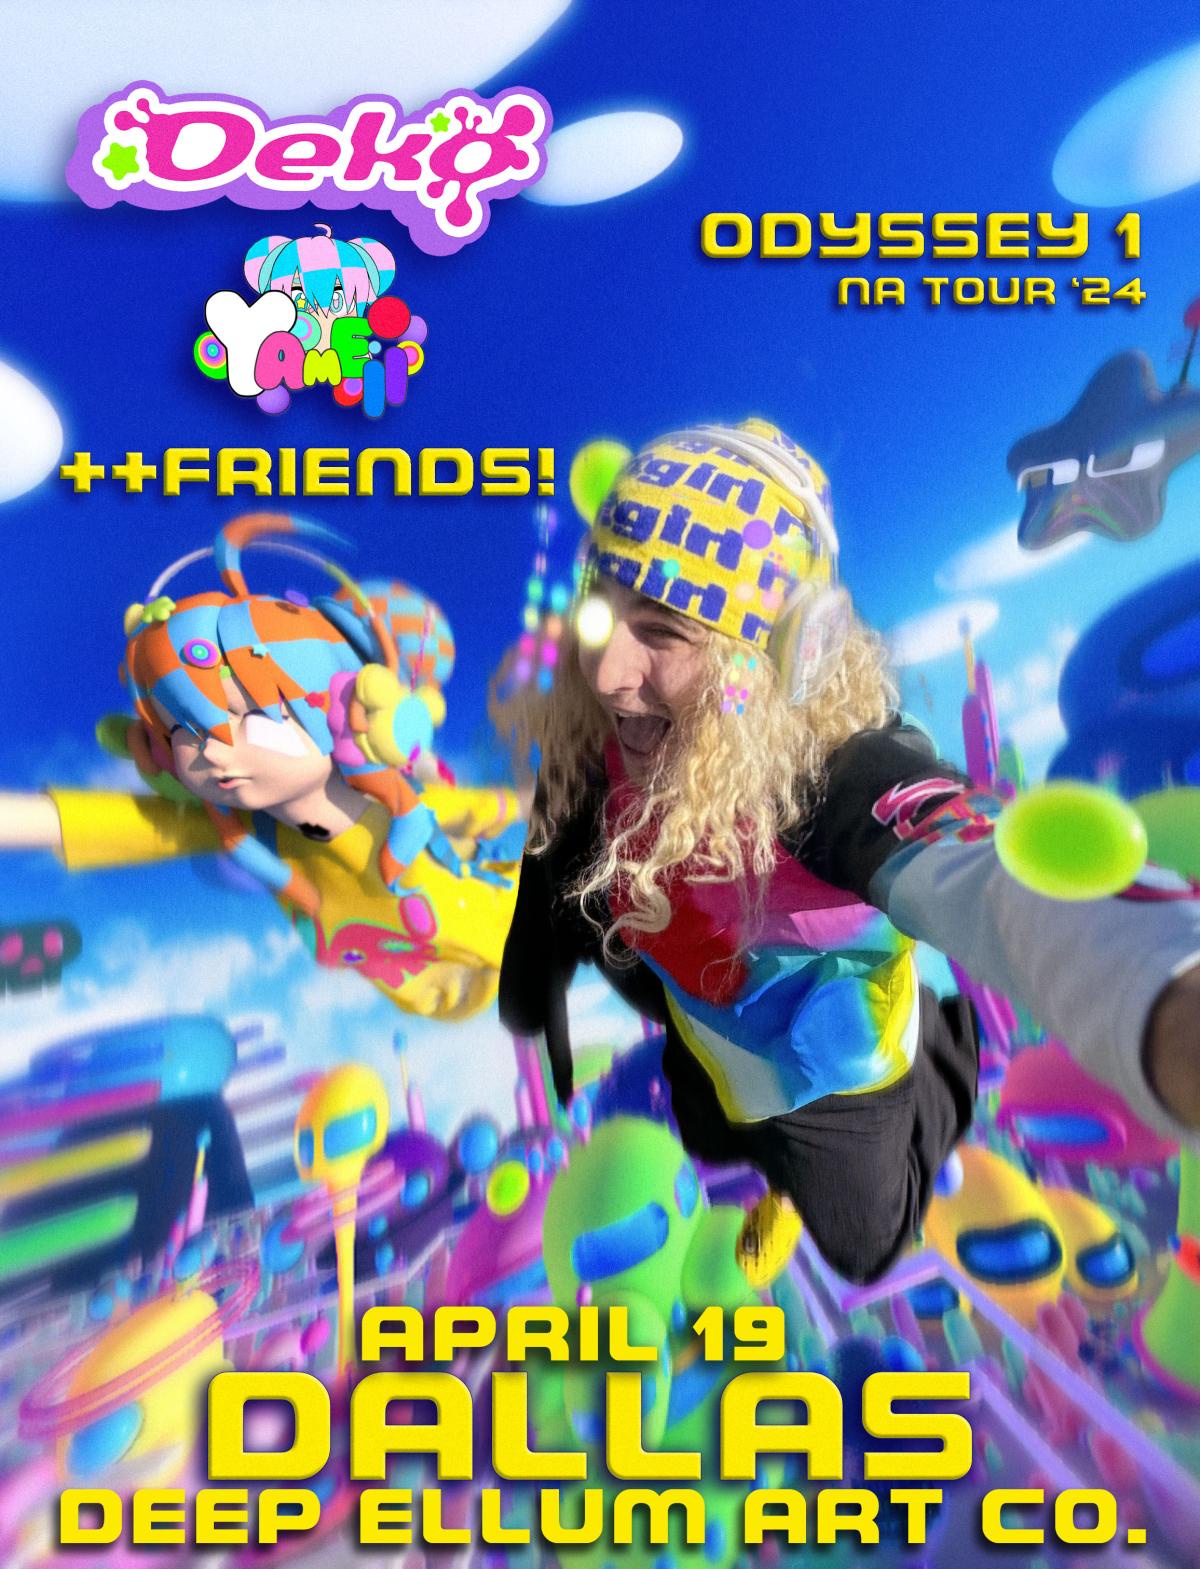 Embark on the Odyssey 1 Tour with Yameii & Friends